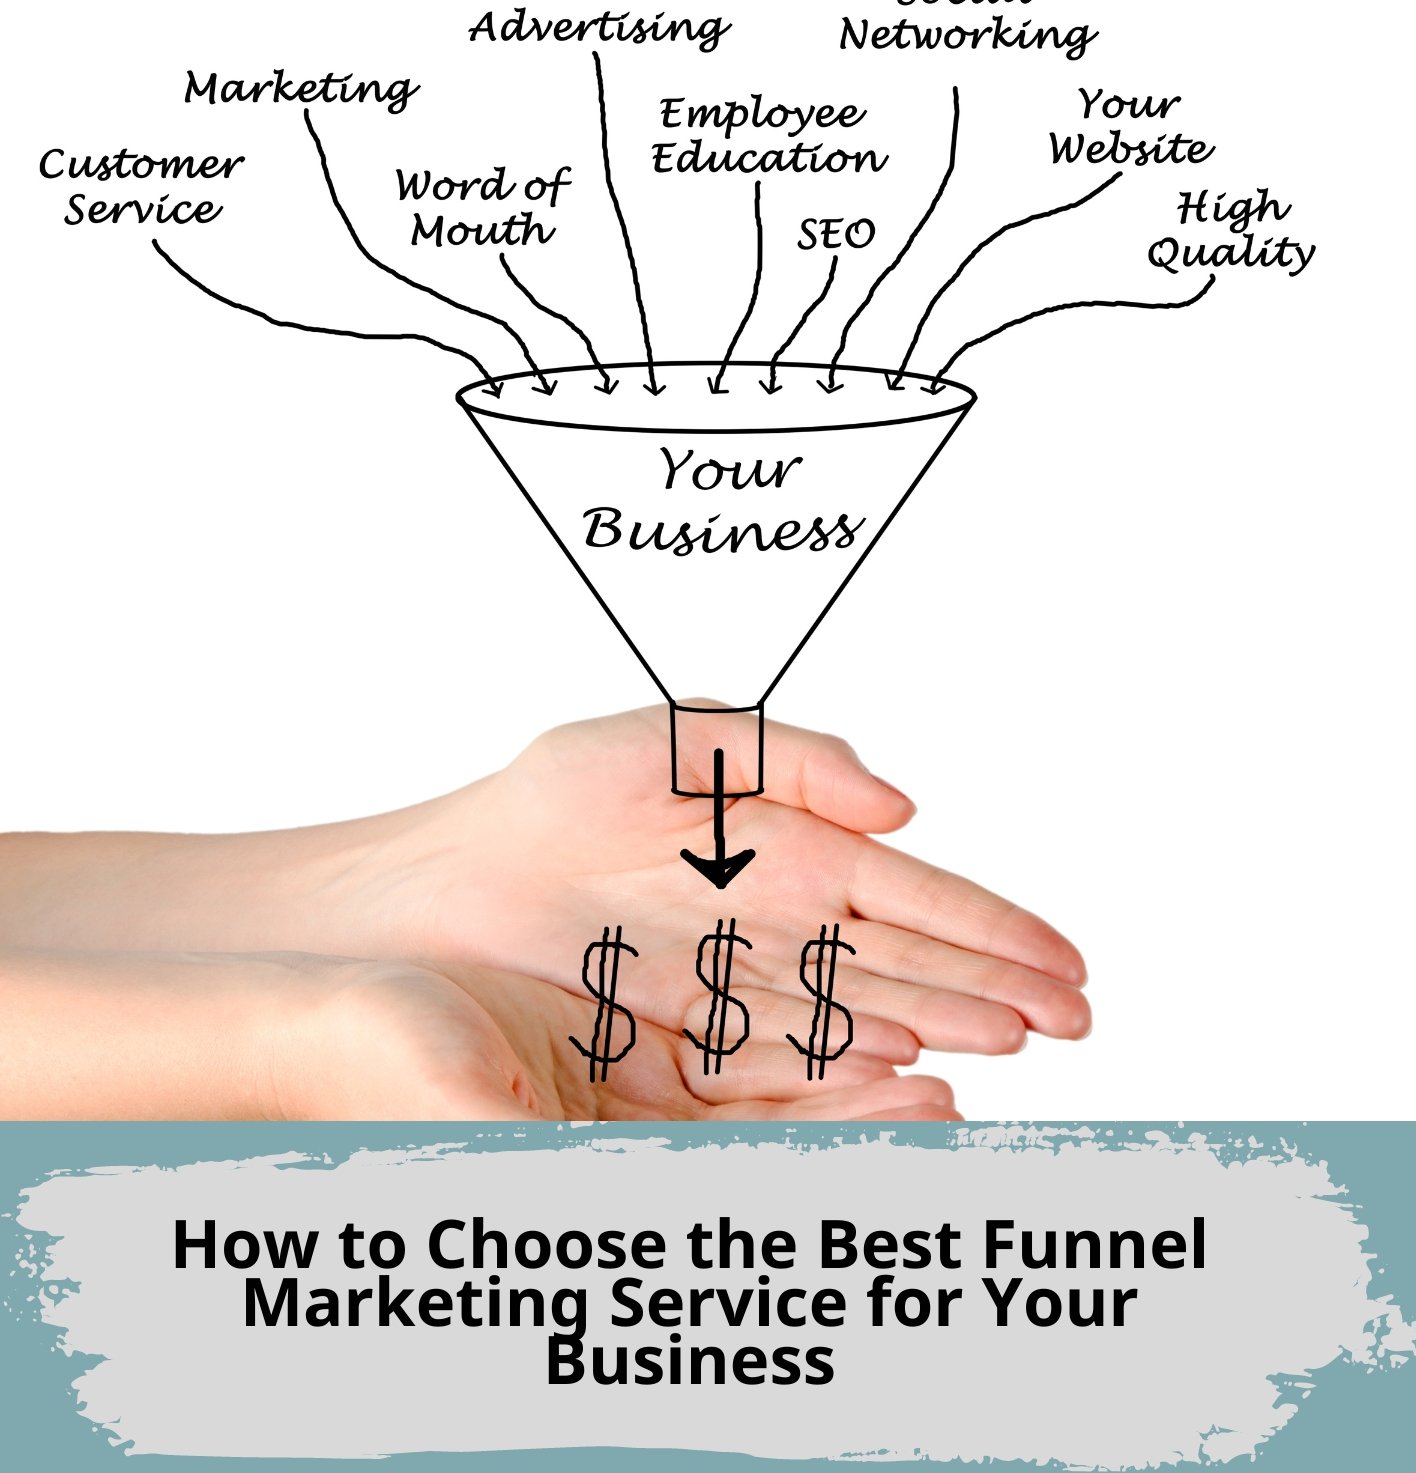 How to Choose the Best Funnel Marketing Service for Your Business